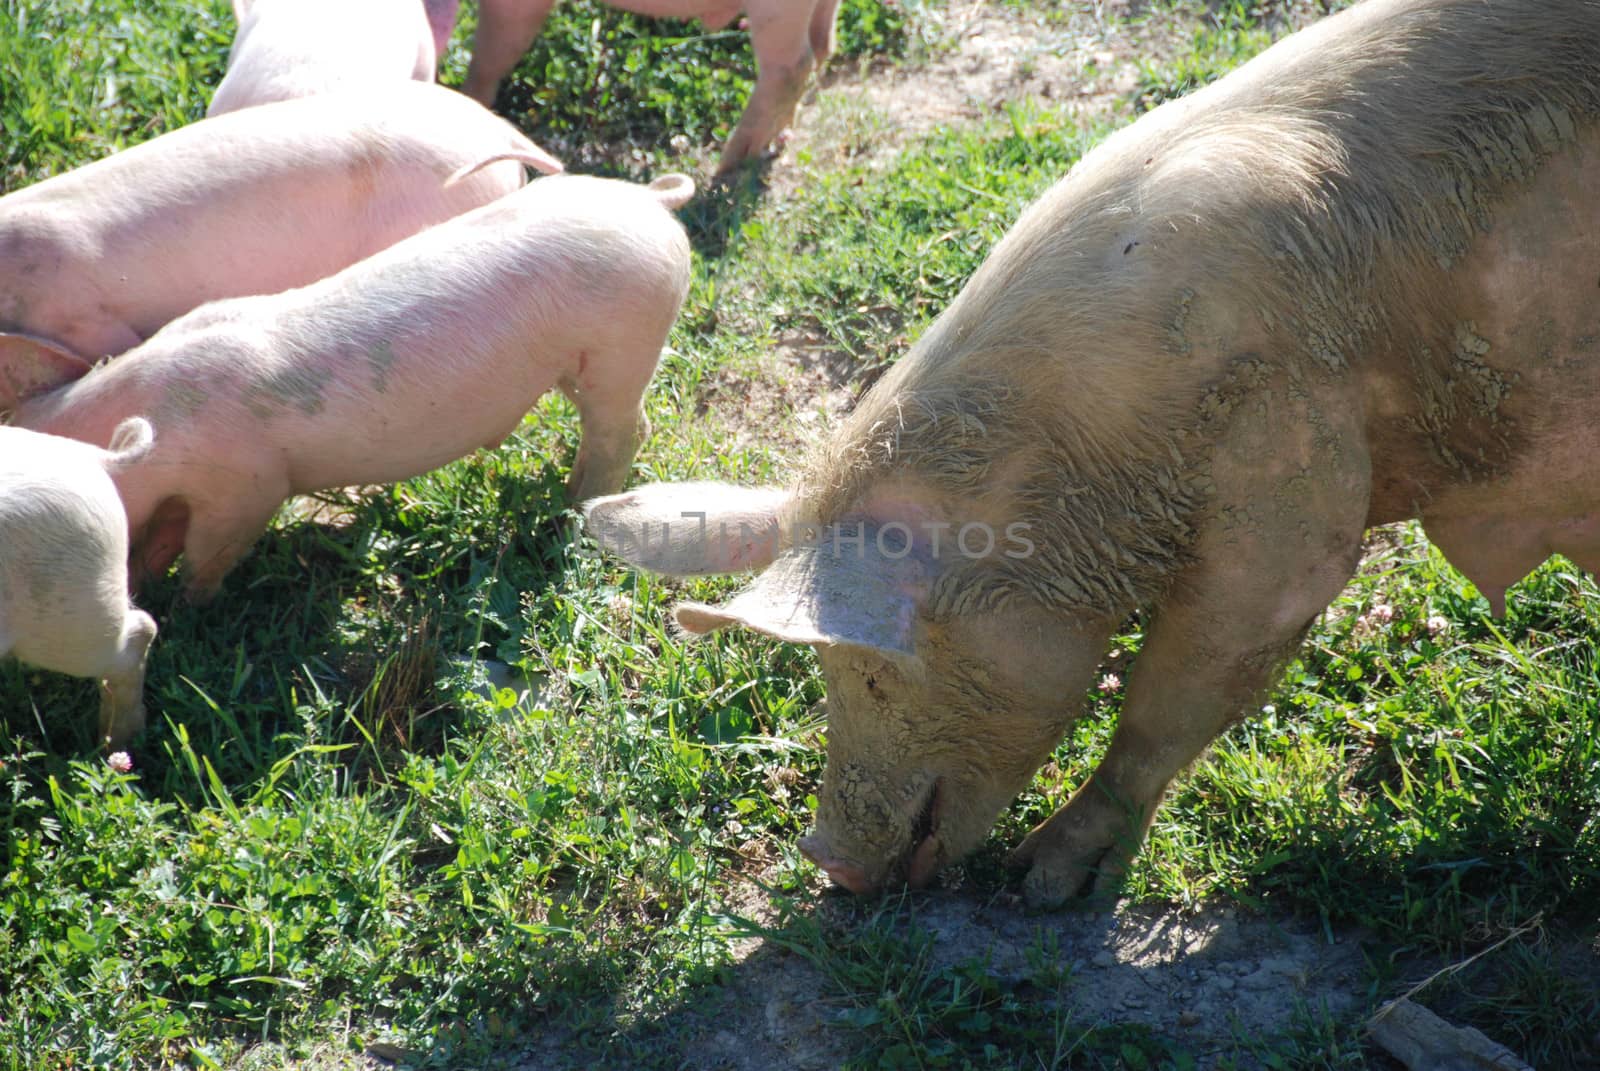 Some piglets run in a meadow